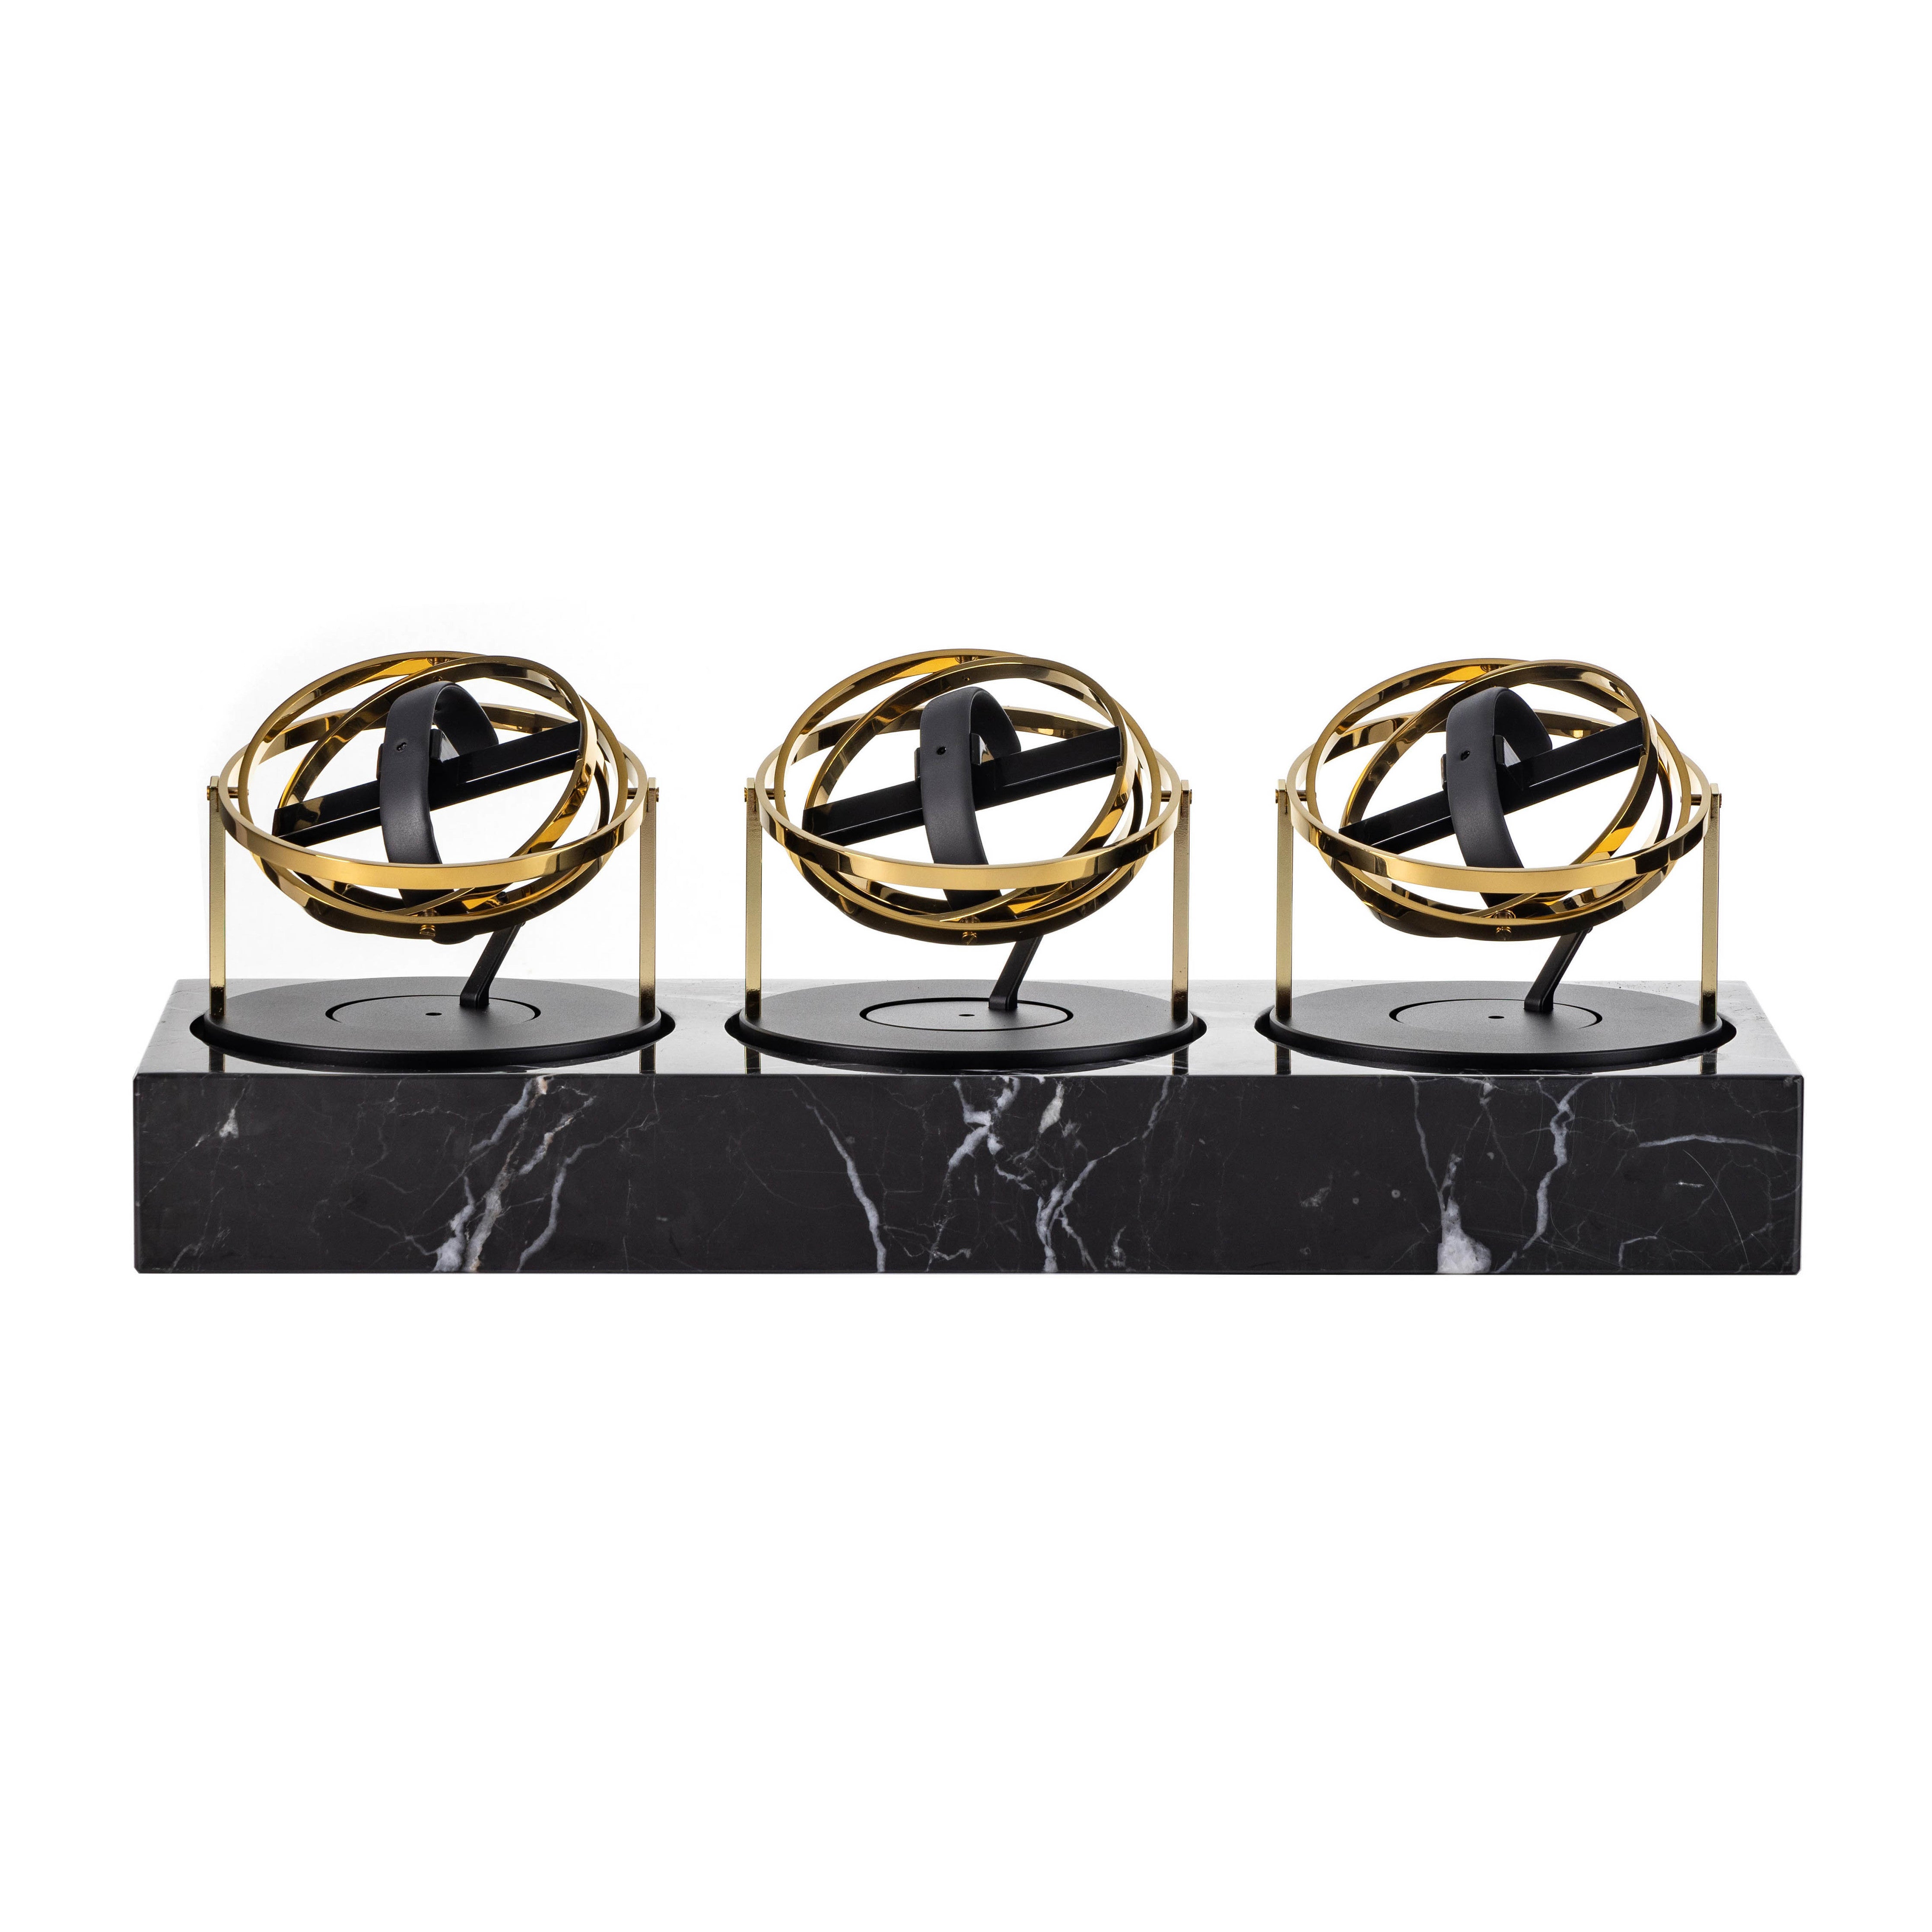 Triple Watch Winder - Astronomia X1 Silver - Black Marble Edition